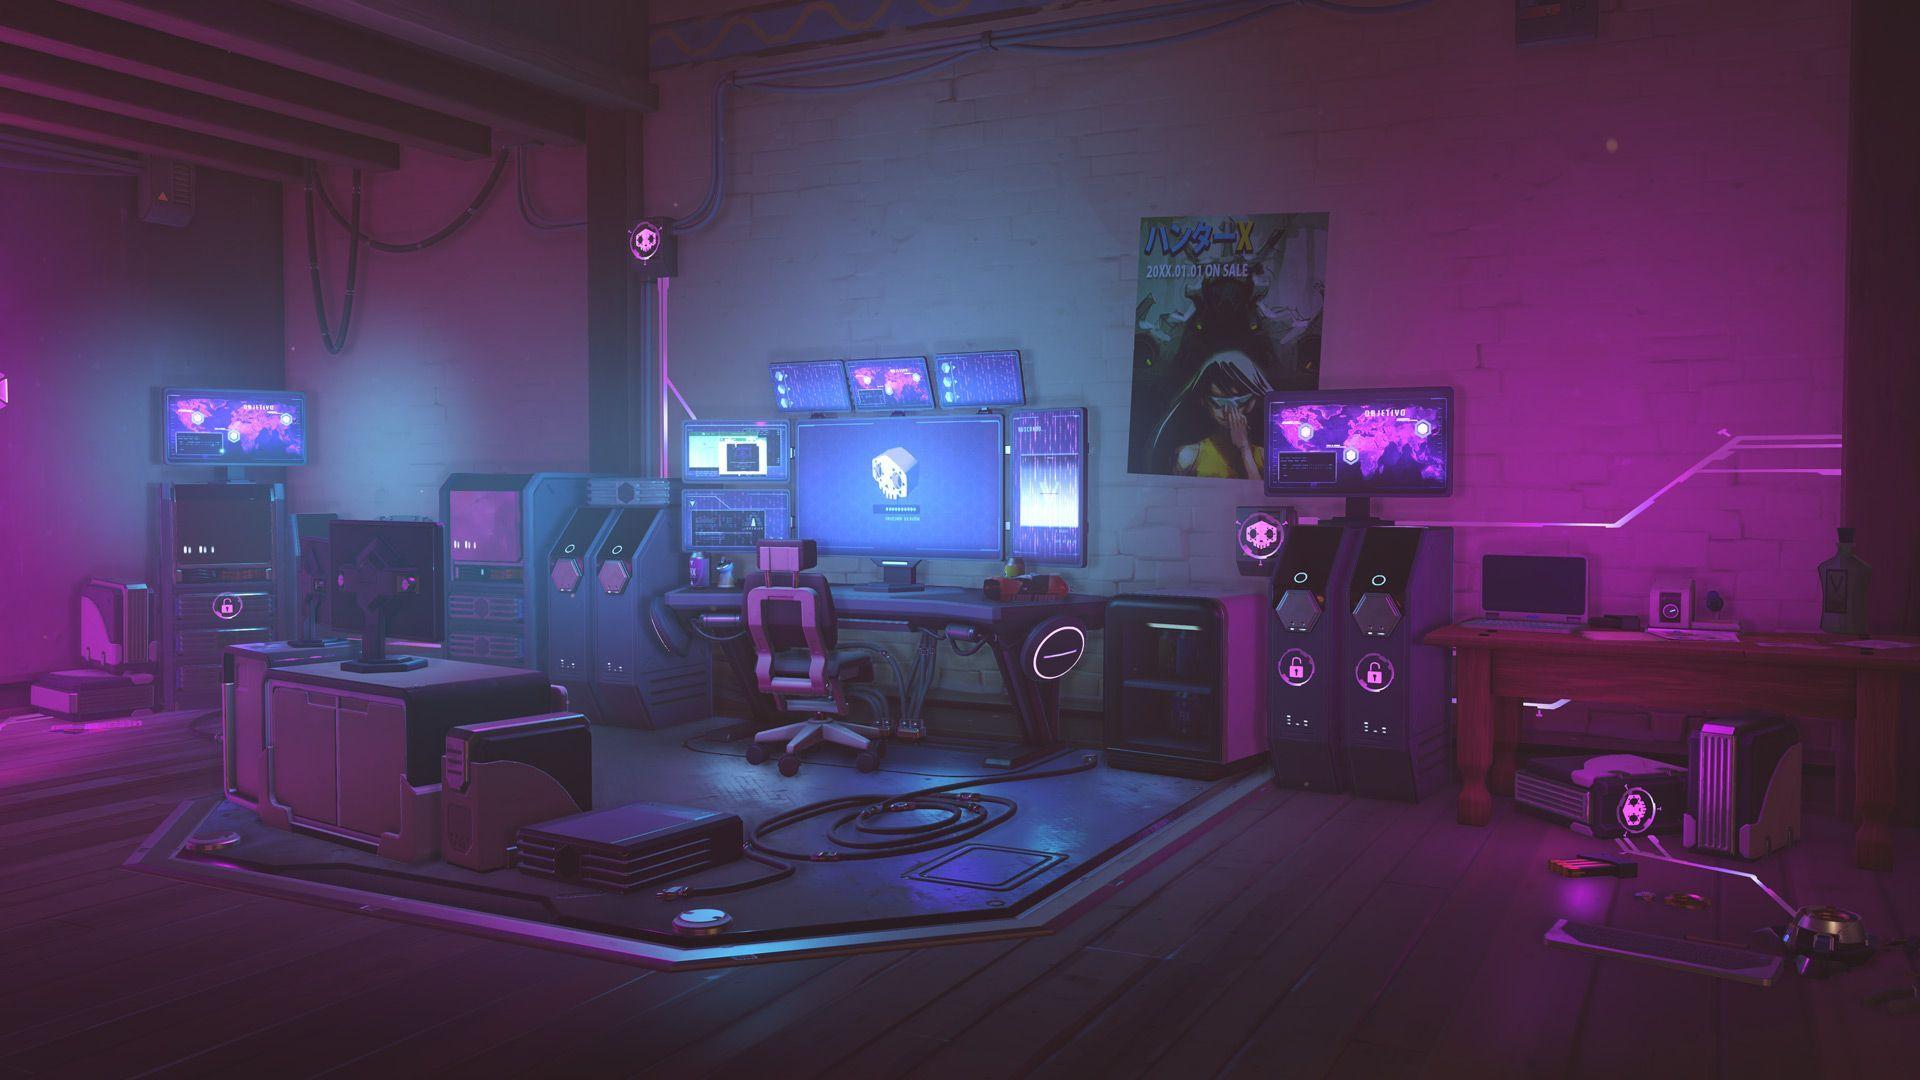 Gaming Room Wallpapers Top Free Gaming Room Backgrounds Wallpaperaccess Are you asking for anime with a less traditional aesthetic? gaming room wallpapers top free